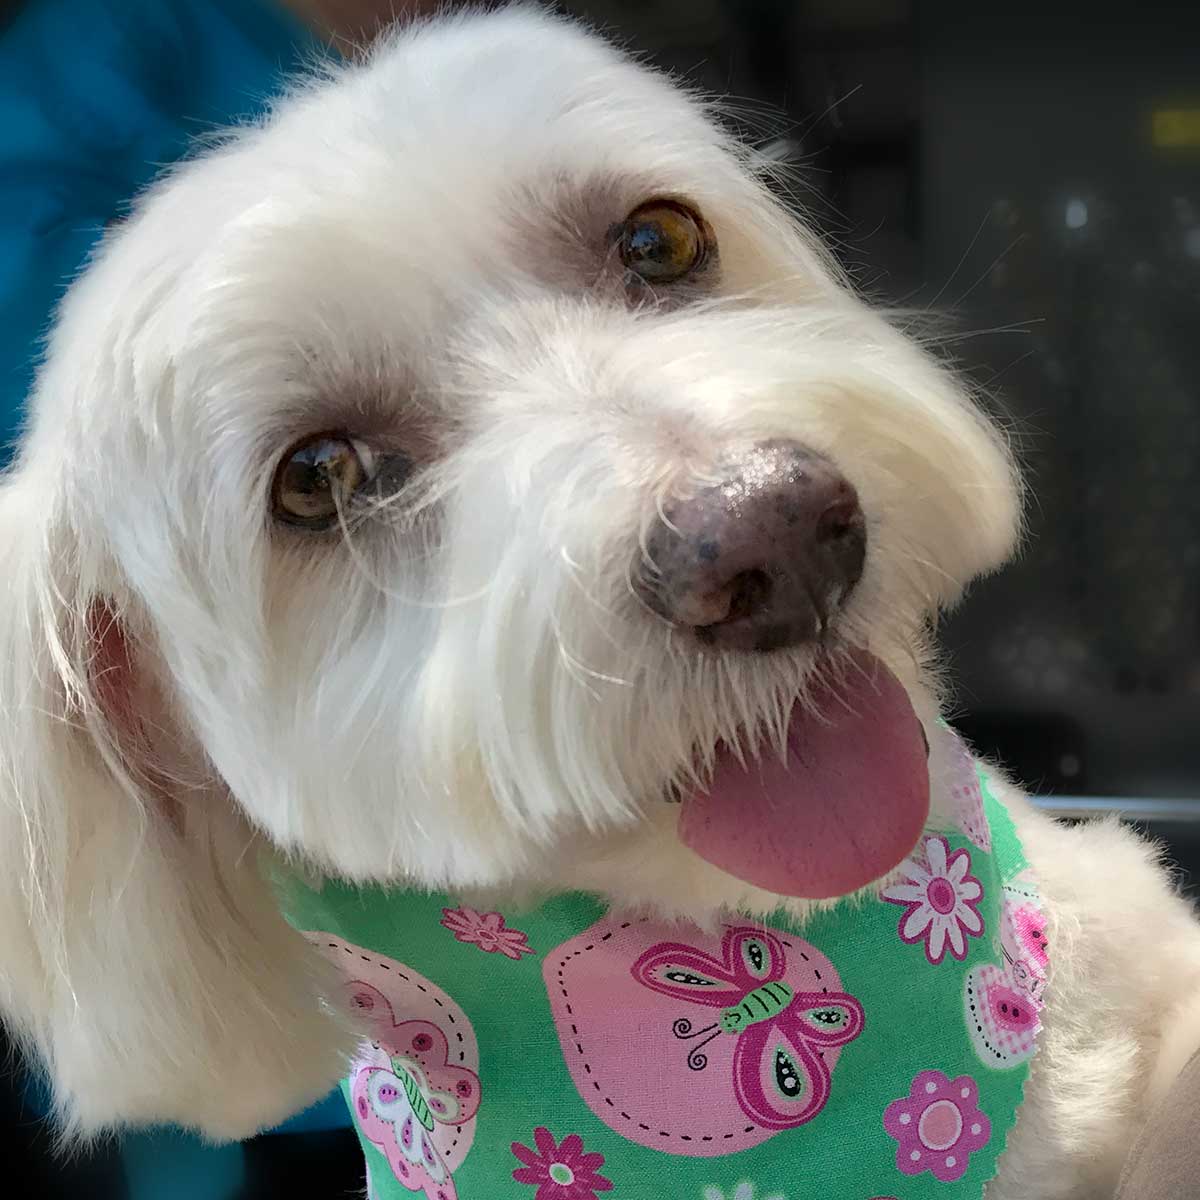 Willow, Bichon Frise, Maltese and Havanese mix, with pretty brown eyes wearing a green butterfly bandana.